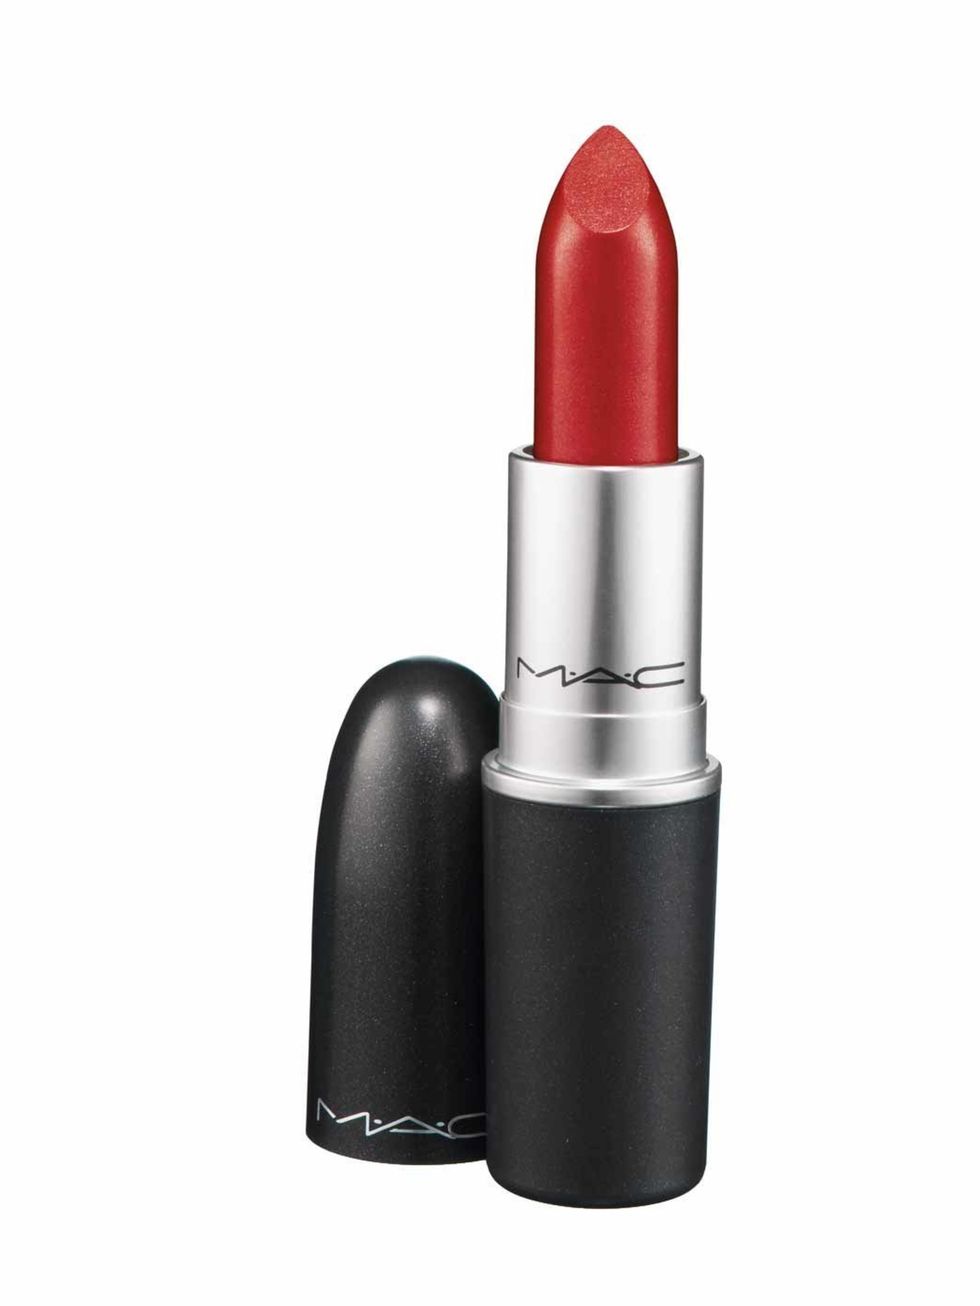 <p><strong>OUT:</strong> Cinema date to see the latest mushy rom-com, £13</p><p><strong>IN: </strong>Perfect pout-making MAC Lipstick in Ruby Woo, £13.50</p><p>Who needs a man when you can have the perfect red lipstick instead? MAC Ruby Woo, is a cult pro